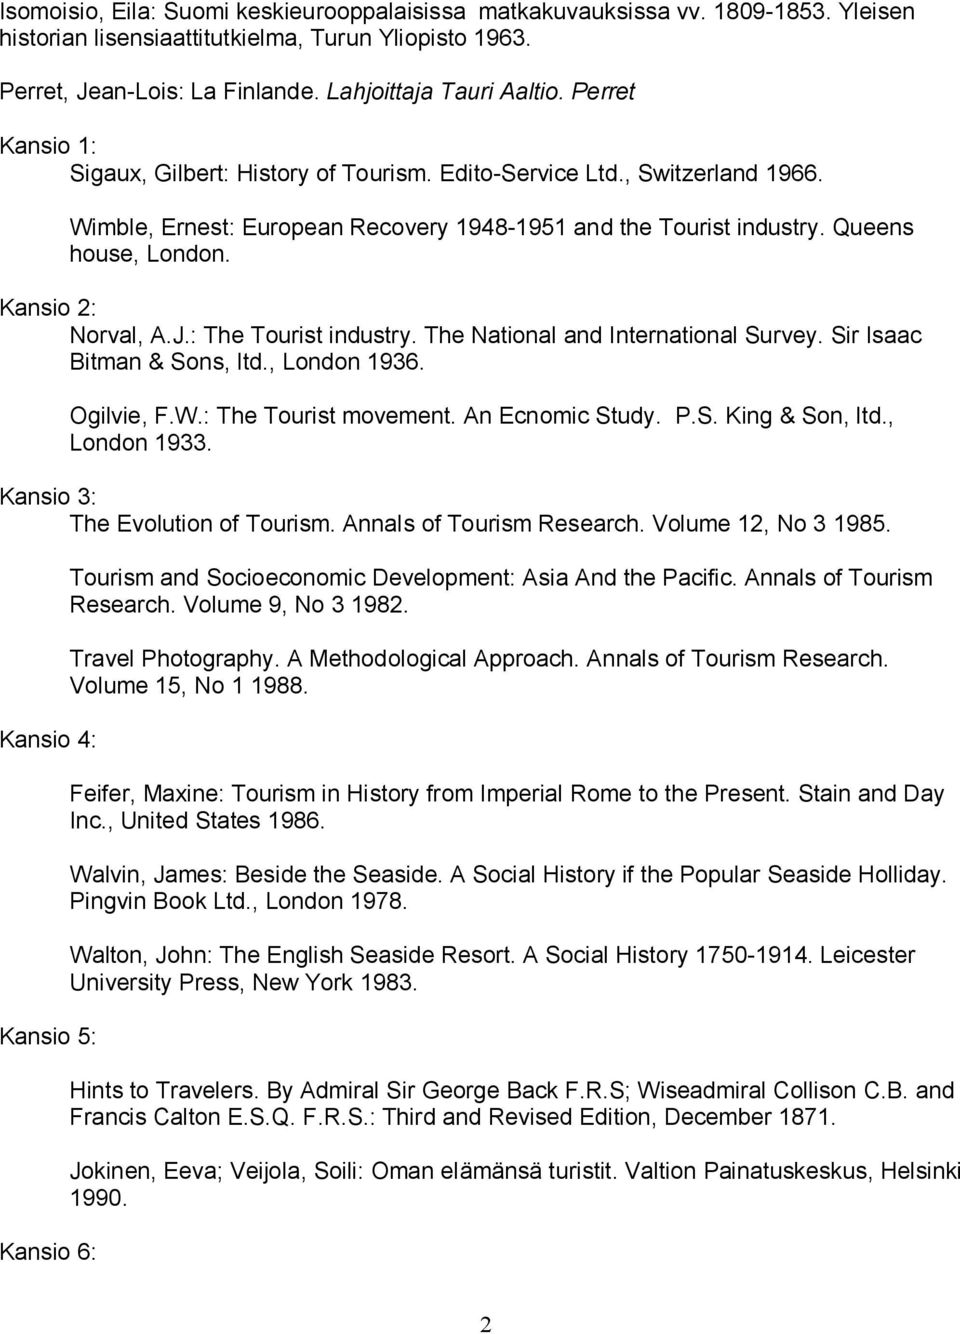 Kansio 2: Norval, A.J.: The Tourist industry. The National and International Survey. Sir Isaac Bitman & Sons, ltd., London 1936. Ogilvie, F.W.: The Tourist movement. An Ecnomic Study. P.S. King & Son, ltd.